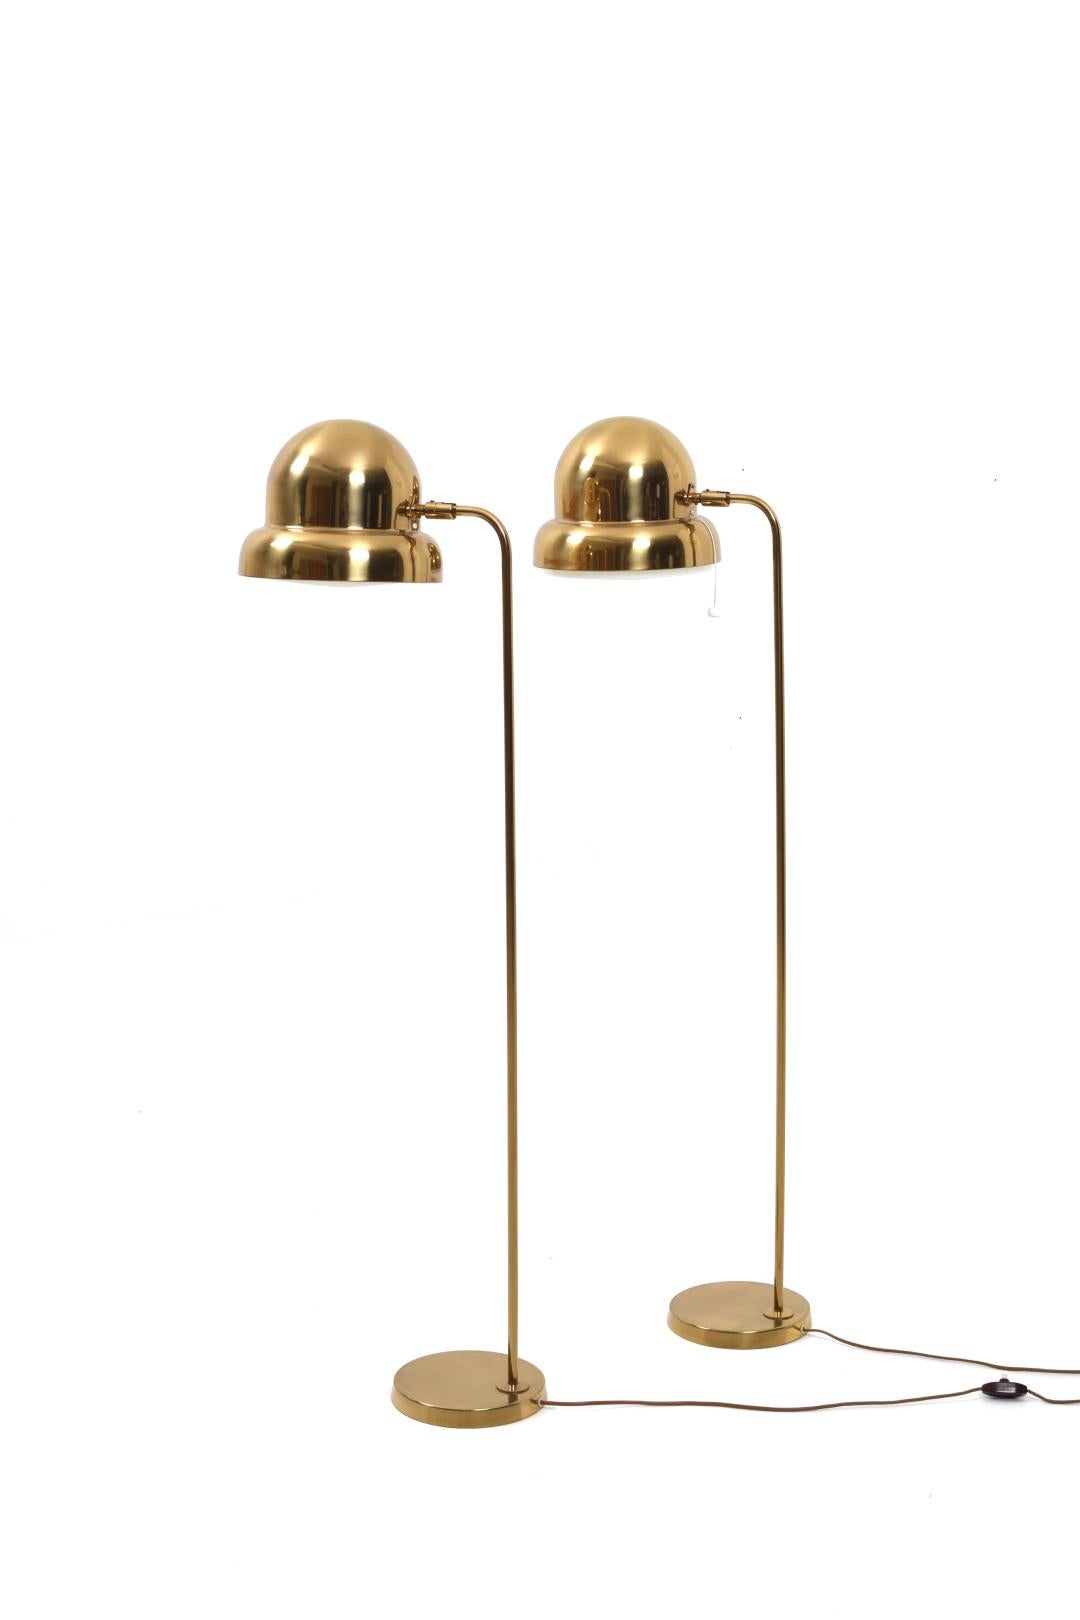 A pair of brass floor lamps from Bergboms, 1960s.
The floor lamps are in fine vintage condition. One lamp has a small dent, see picture. Overall, the lamps are very nice.